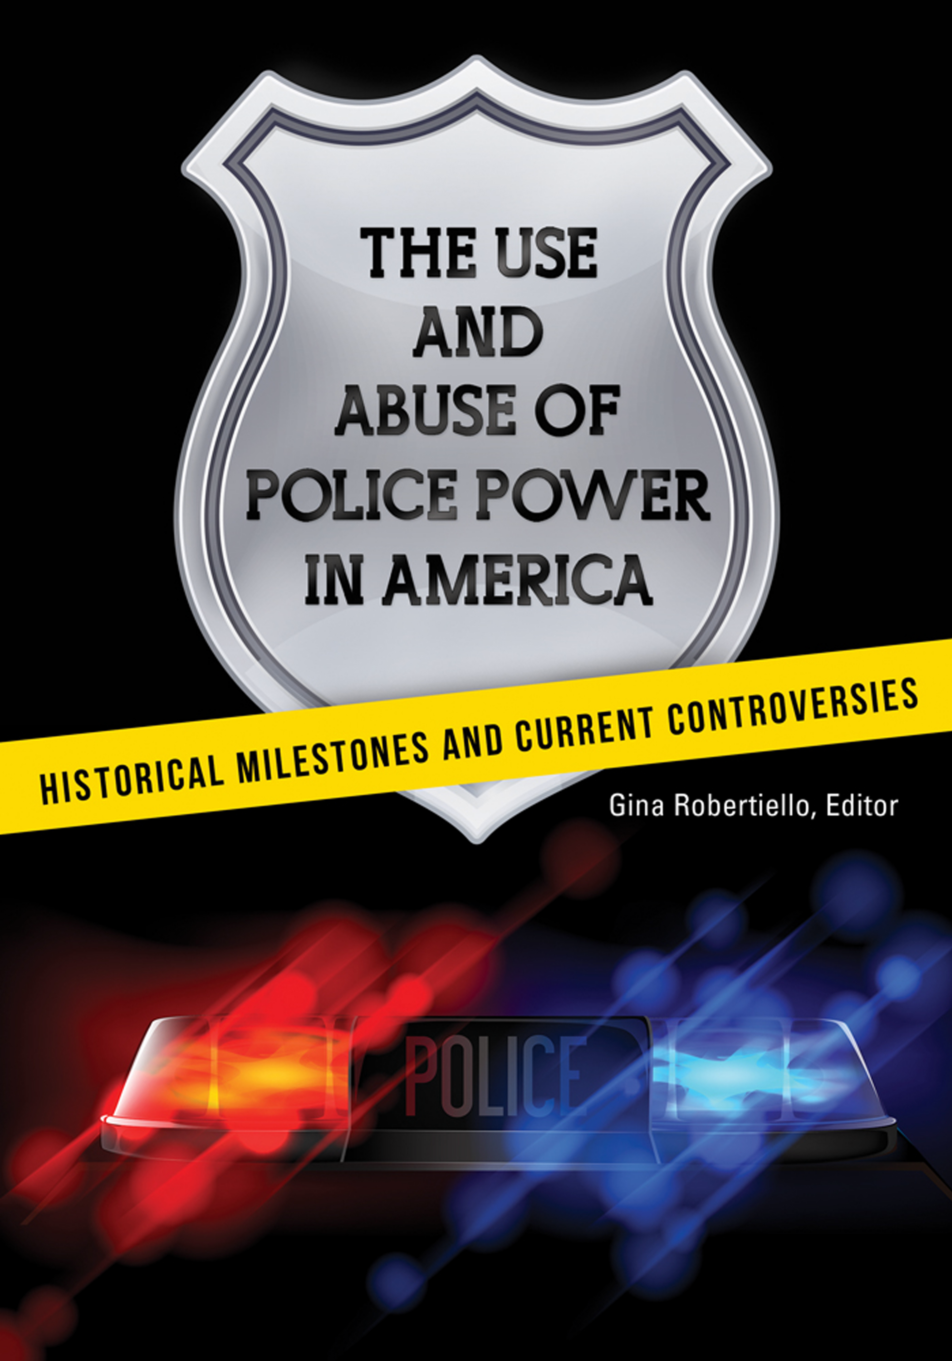 The Use and Abuse of Police Power in America: Historical Milestones and Current Controversies page Cover1